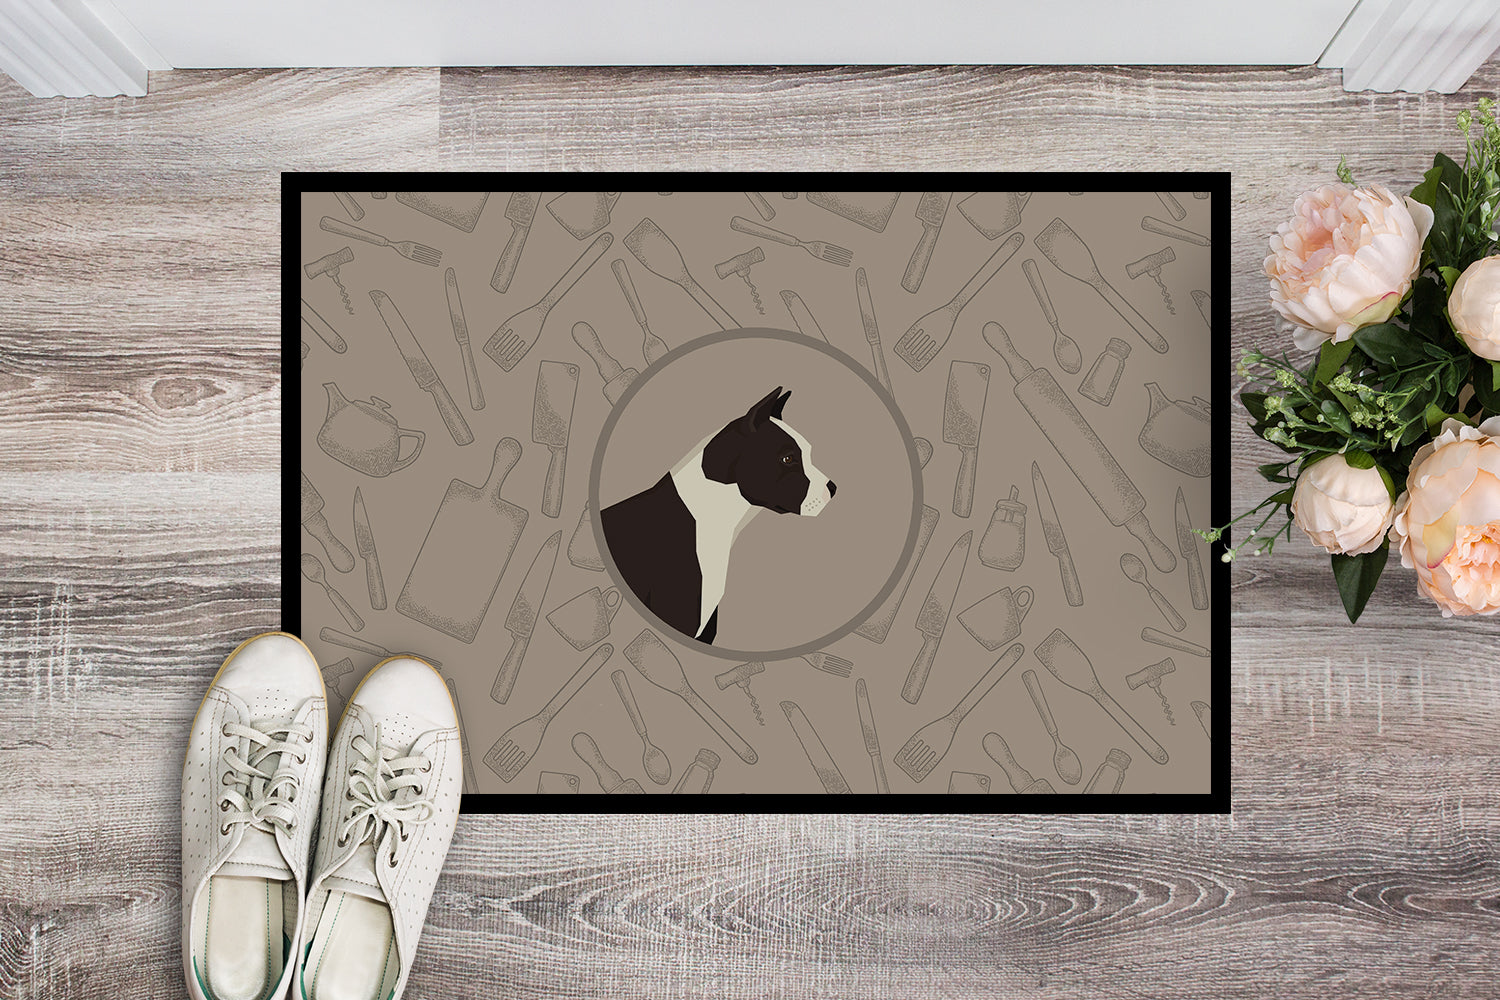 American Staffordshire Terrier In the Kitchen Indoor or Outdoor Mat 18x27 CK2162MAT - the-store.com